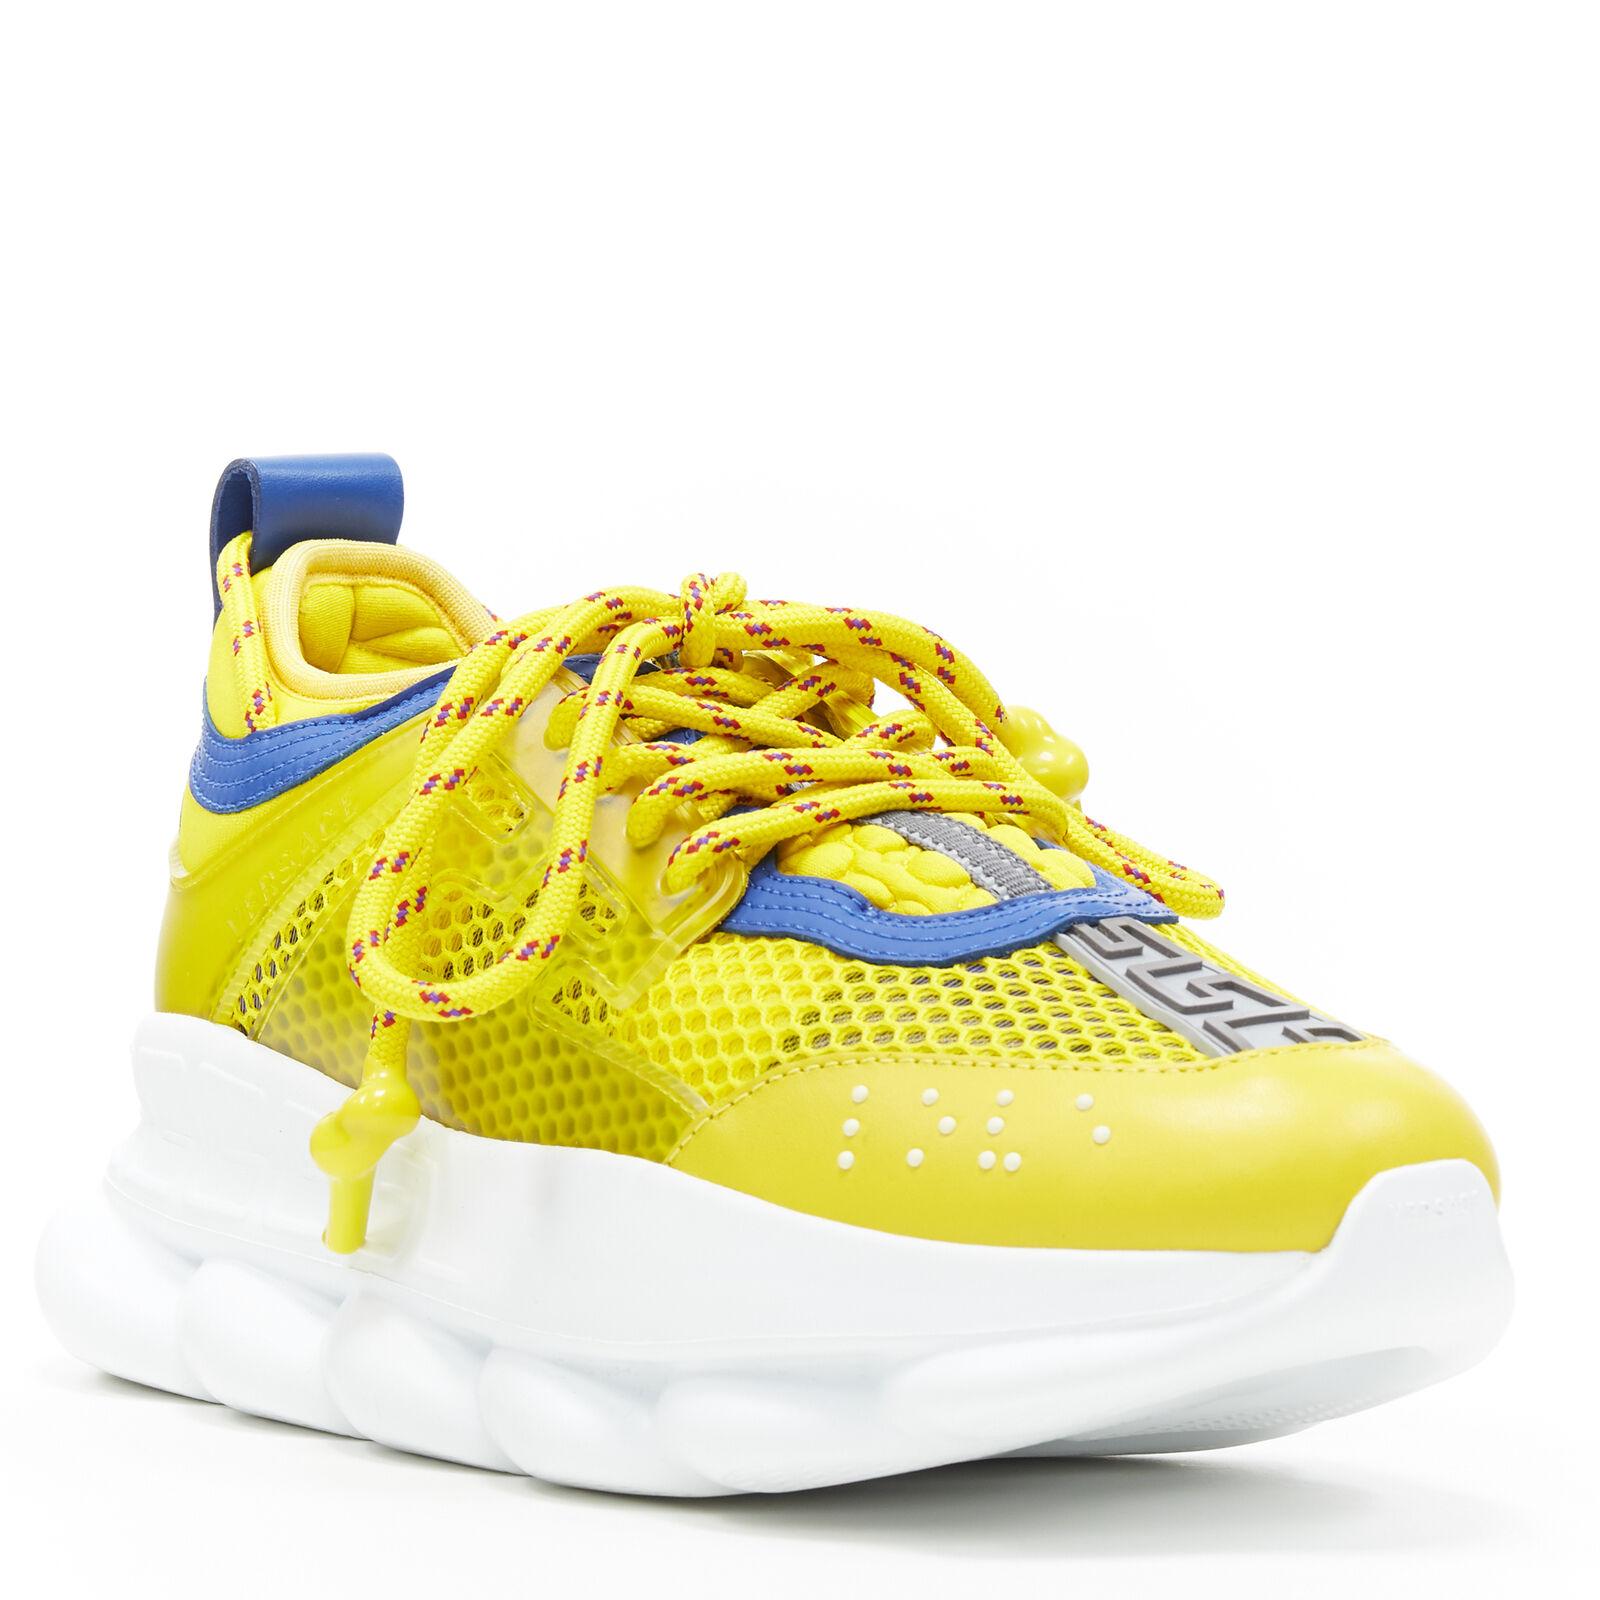 new VERSACE Chain Reaction yellow blue low top chunky sole dad sneaker EU38 US8
Reference: TGAS/A05134
Brand: Versace
Designer: Donatella Versace
Model: Versace Chain Reaction
Collection: Runway
Material: Fabric, Leather
Color: Yellow
Pattern: